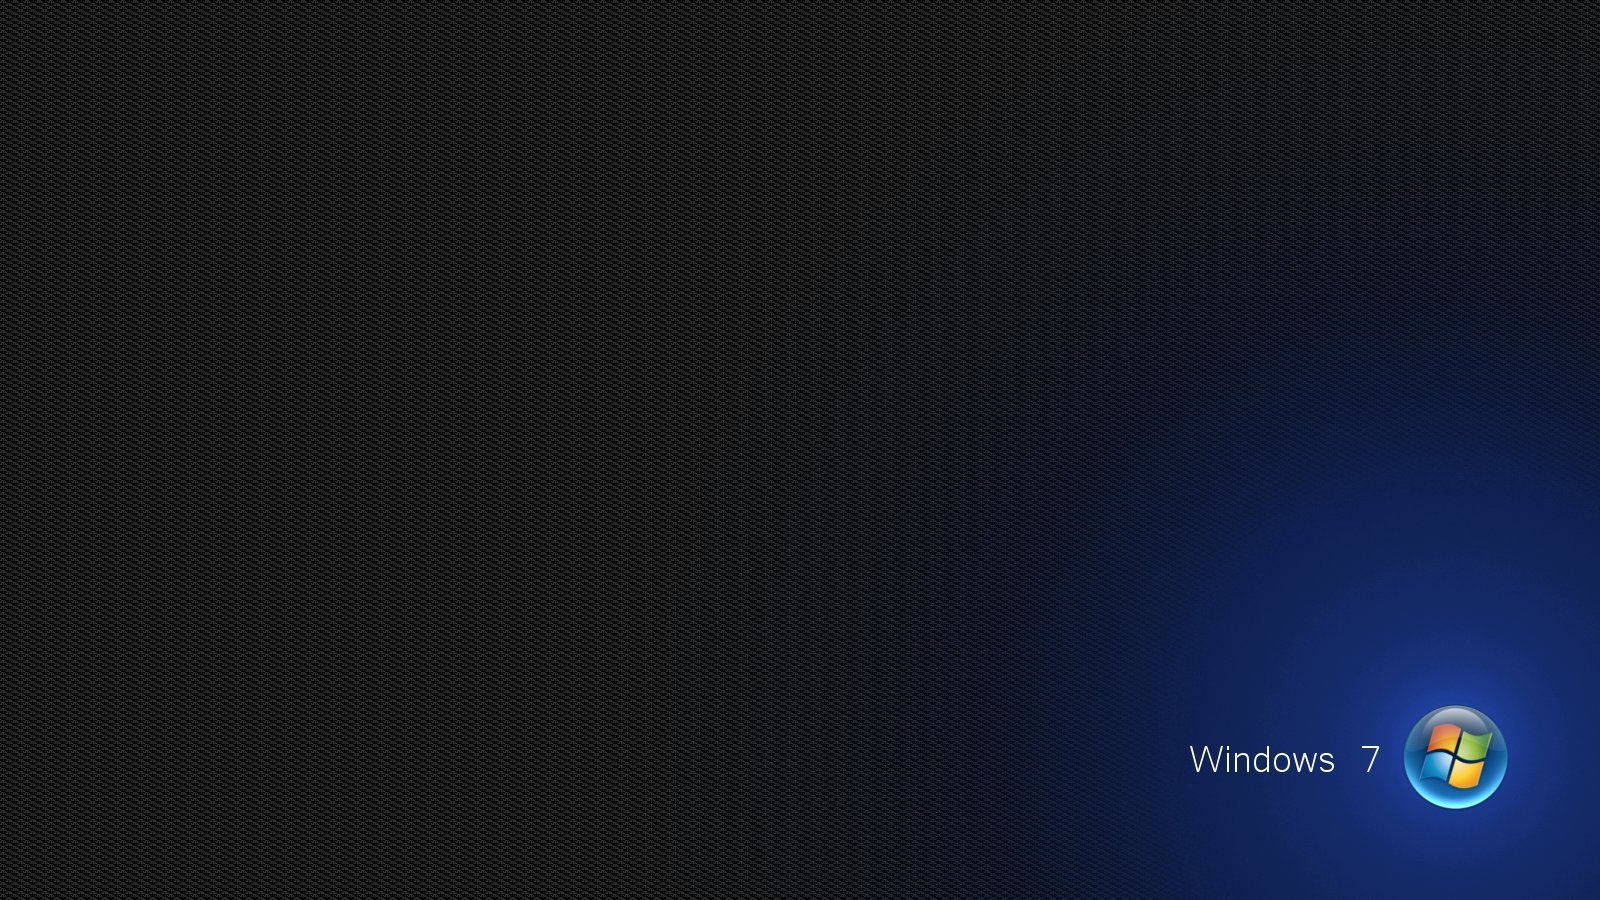 Windows 10's Classic Style And Smooth Design Wallpaper